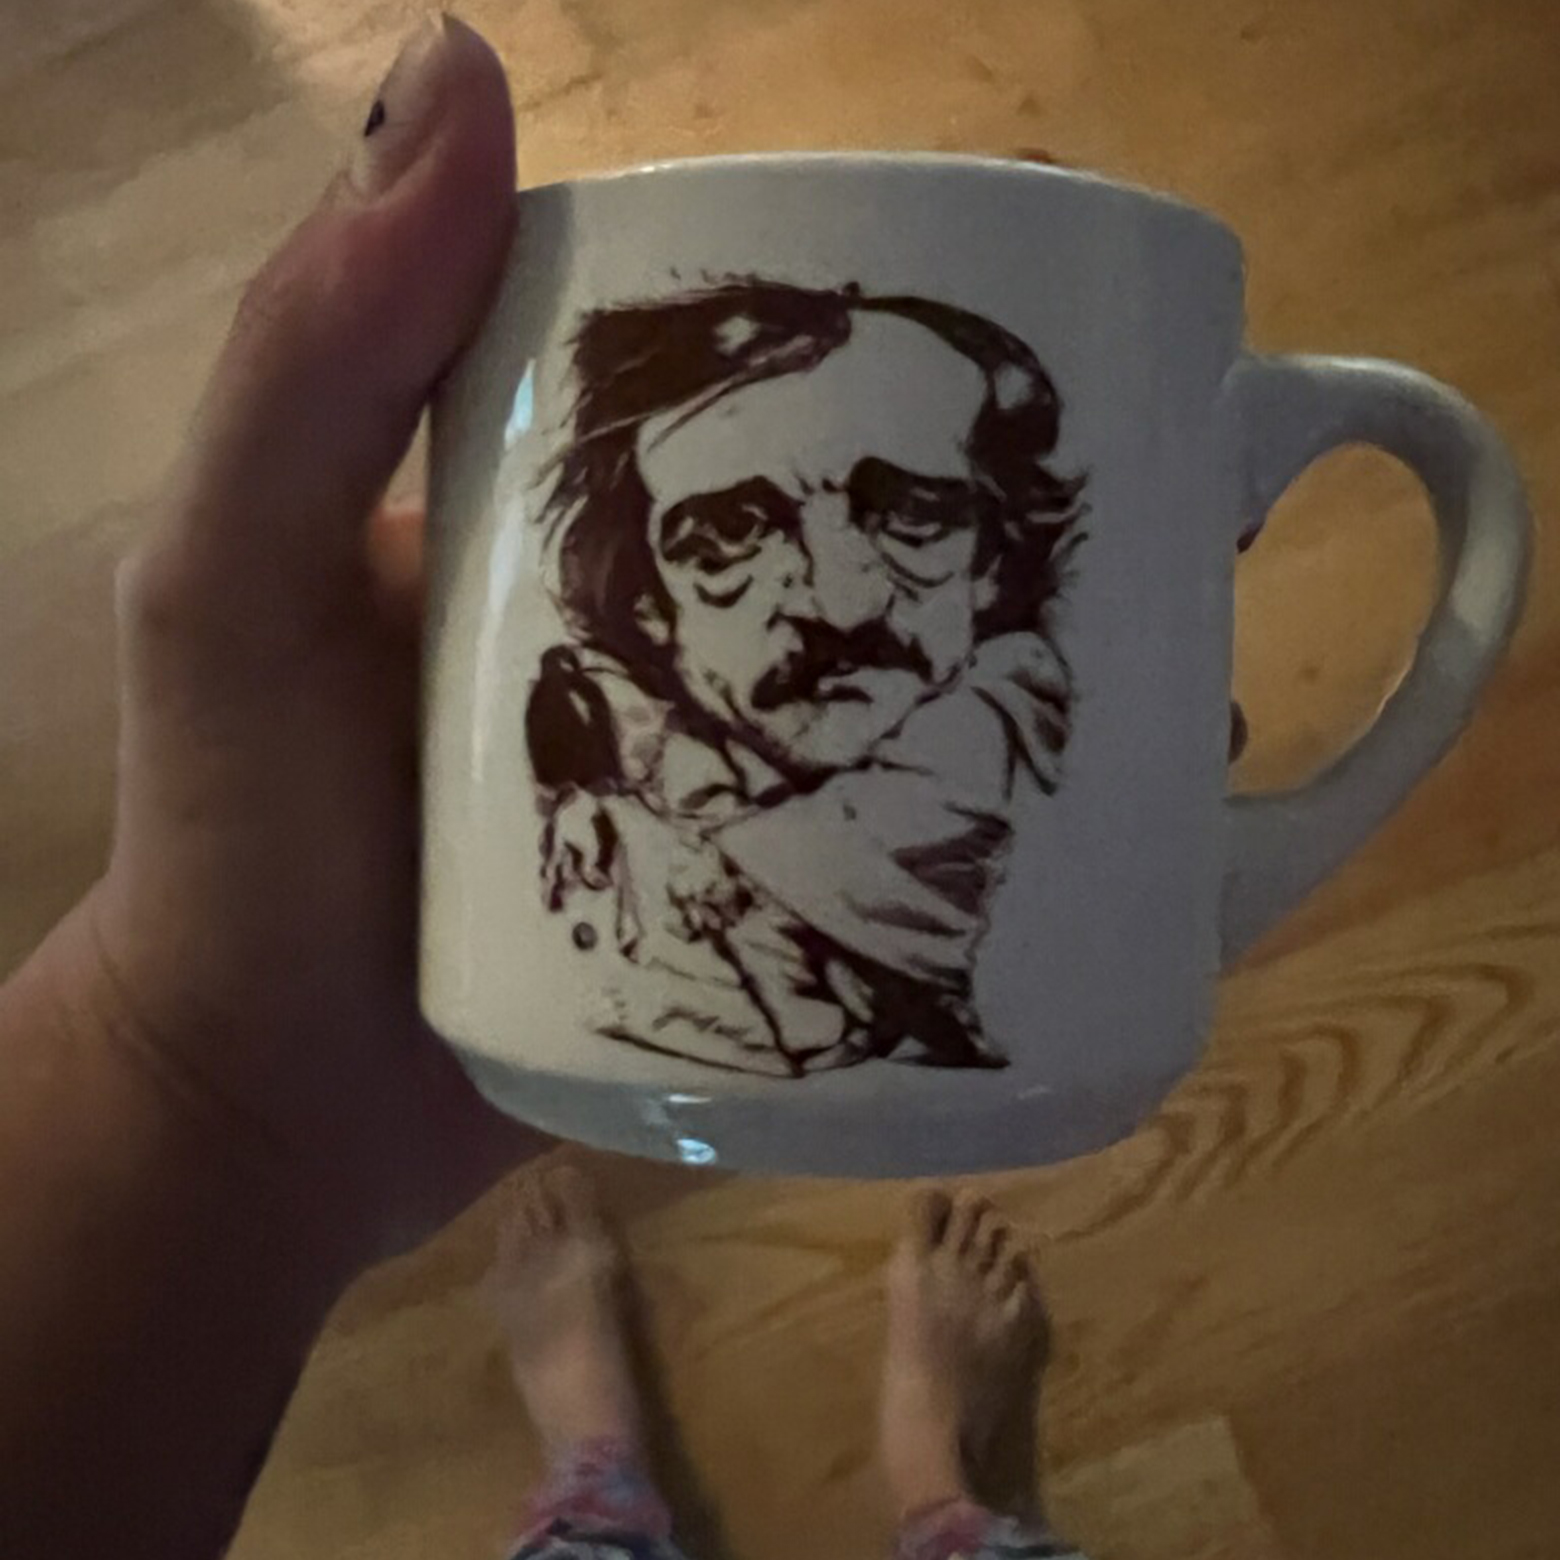 A white coffee mug is held up for the photo. The mug has a caricature of Edgar Allan Poe on it.